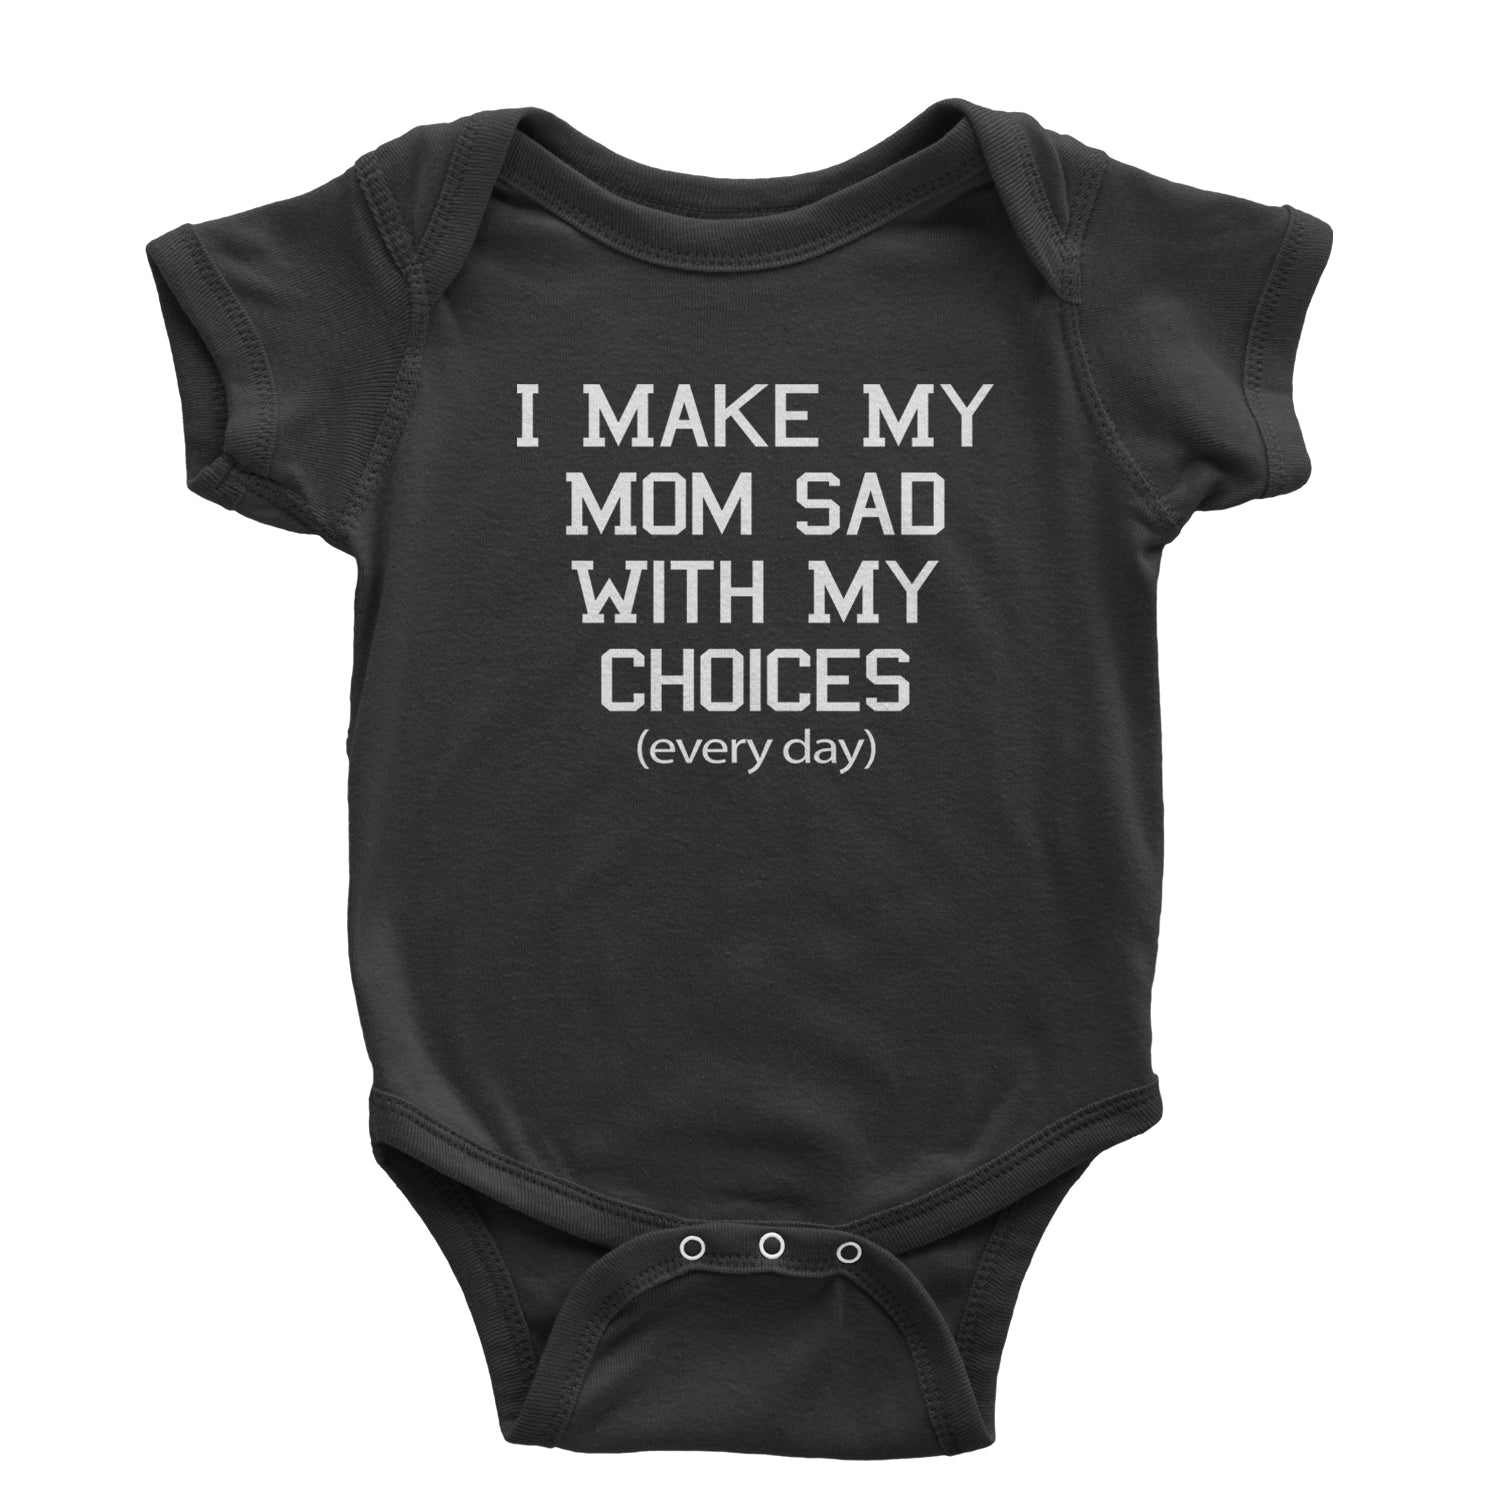 I Make My Mom Sad With My Choices Every Day Infant One-Piece Romper Bodysuit and Toddler T-shirt funny, ironic, meme by Expression Tees